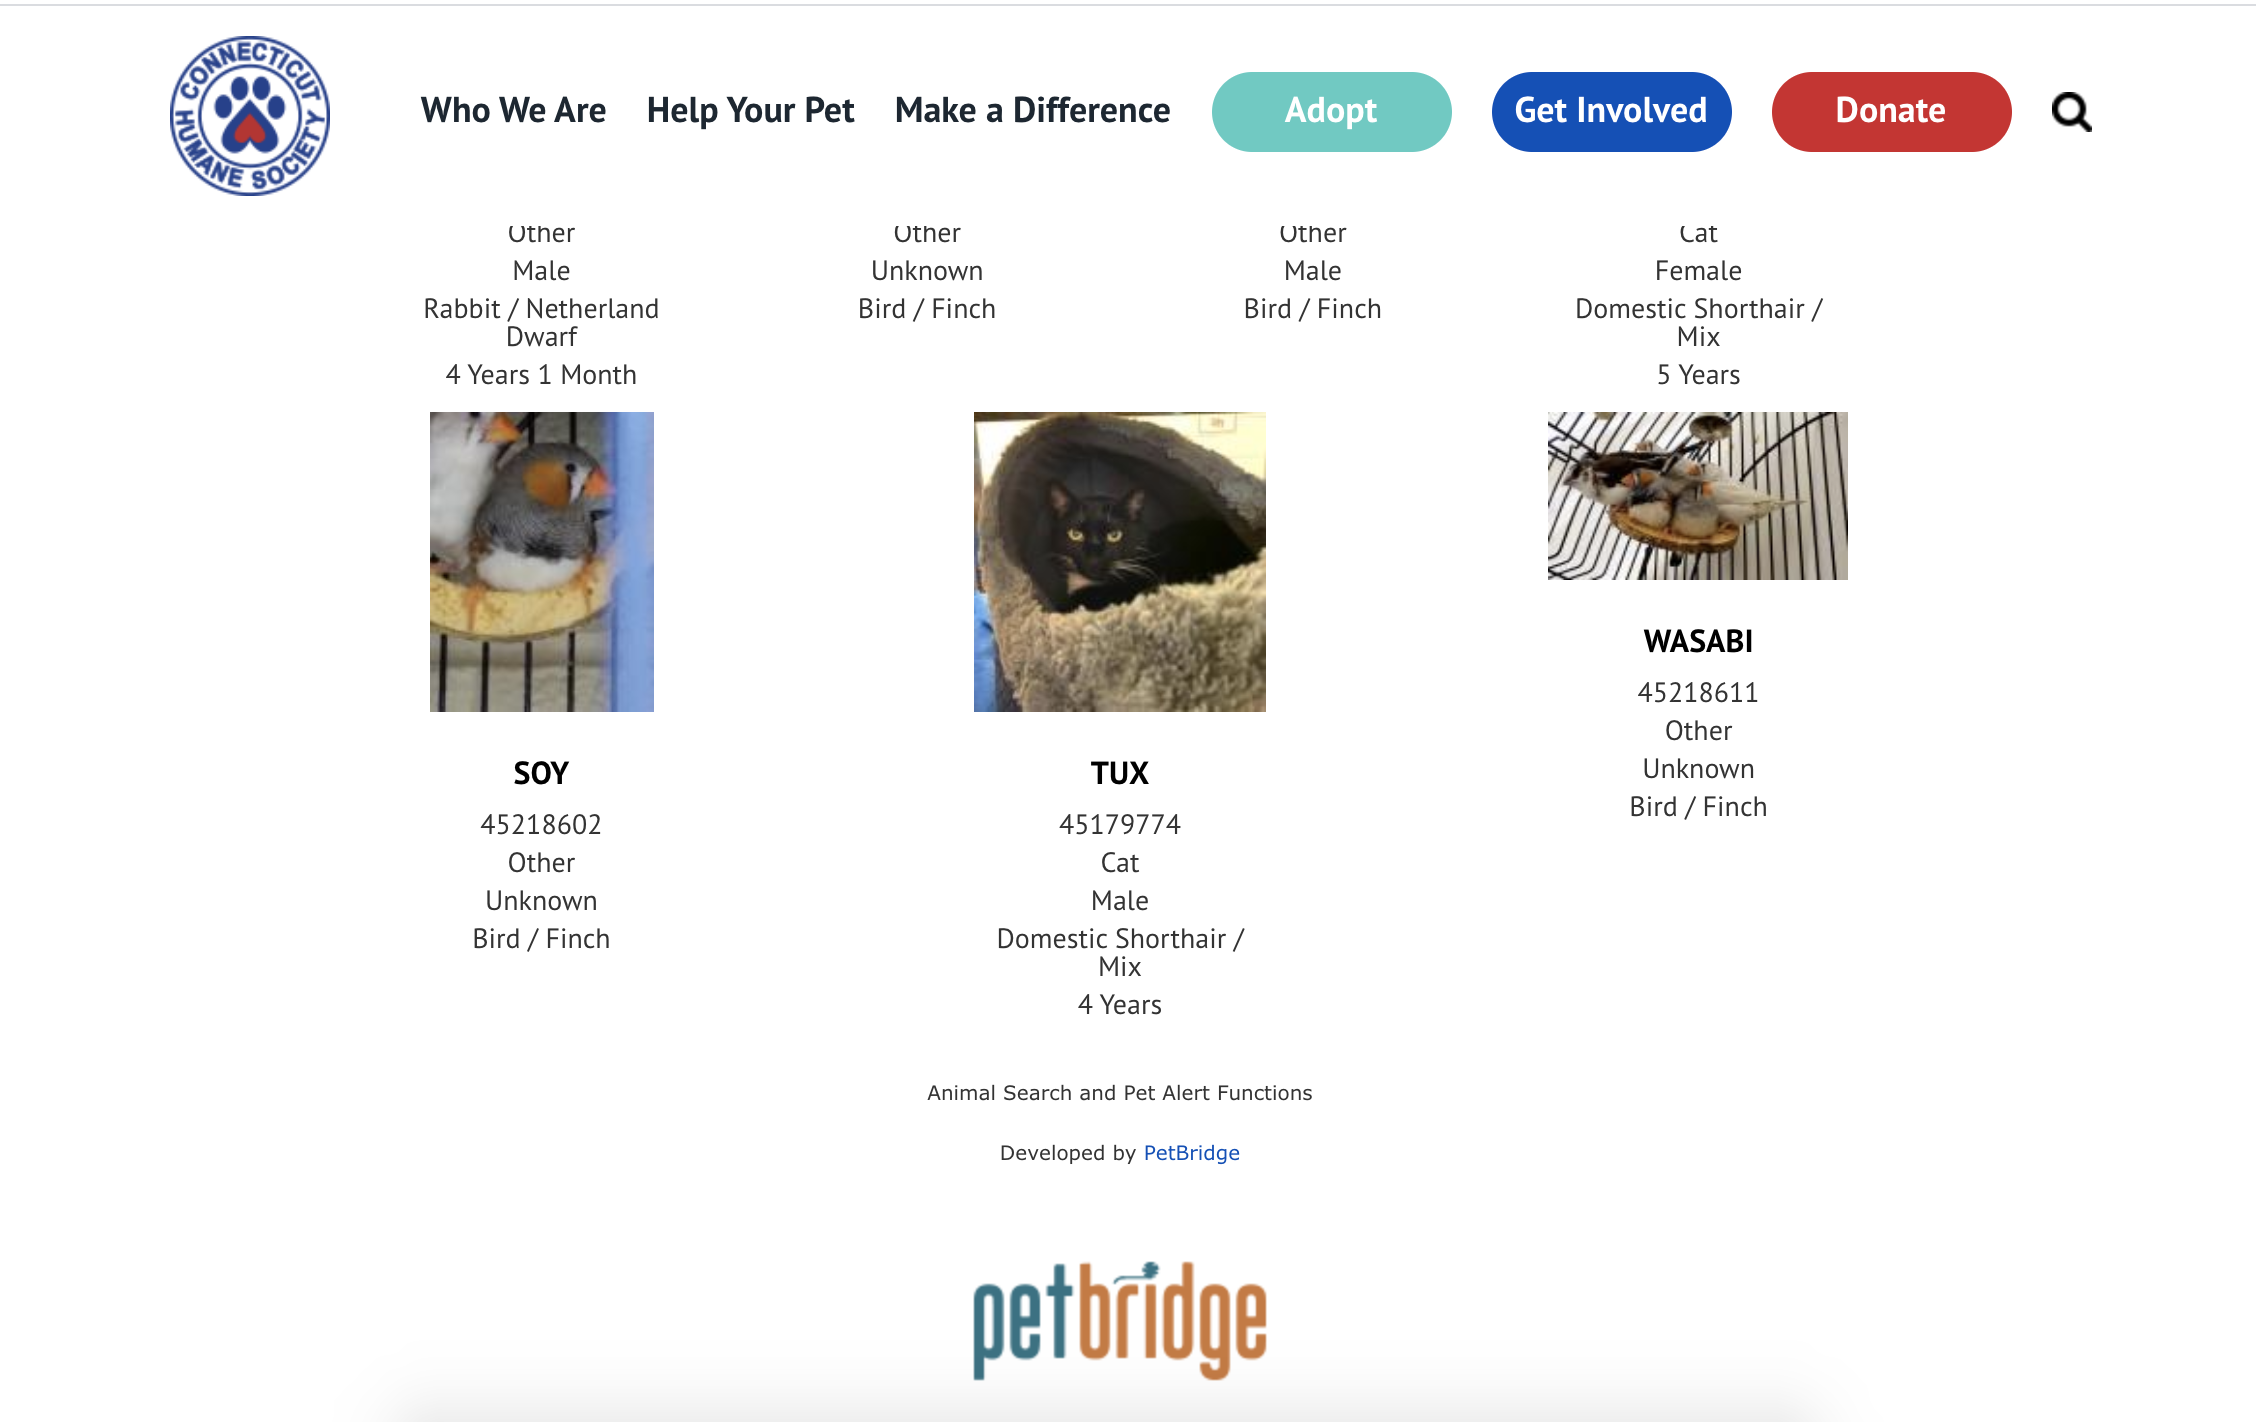 A display of adoptable pets from the Connecticut Humane Society